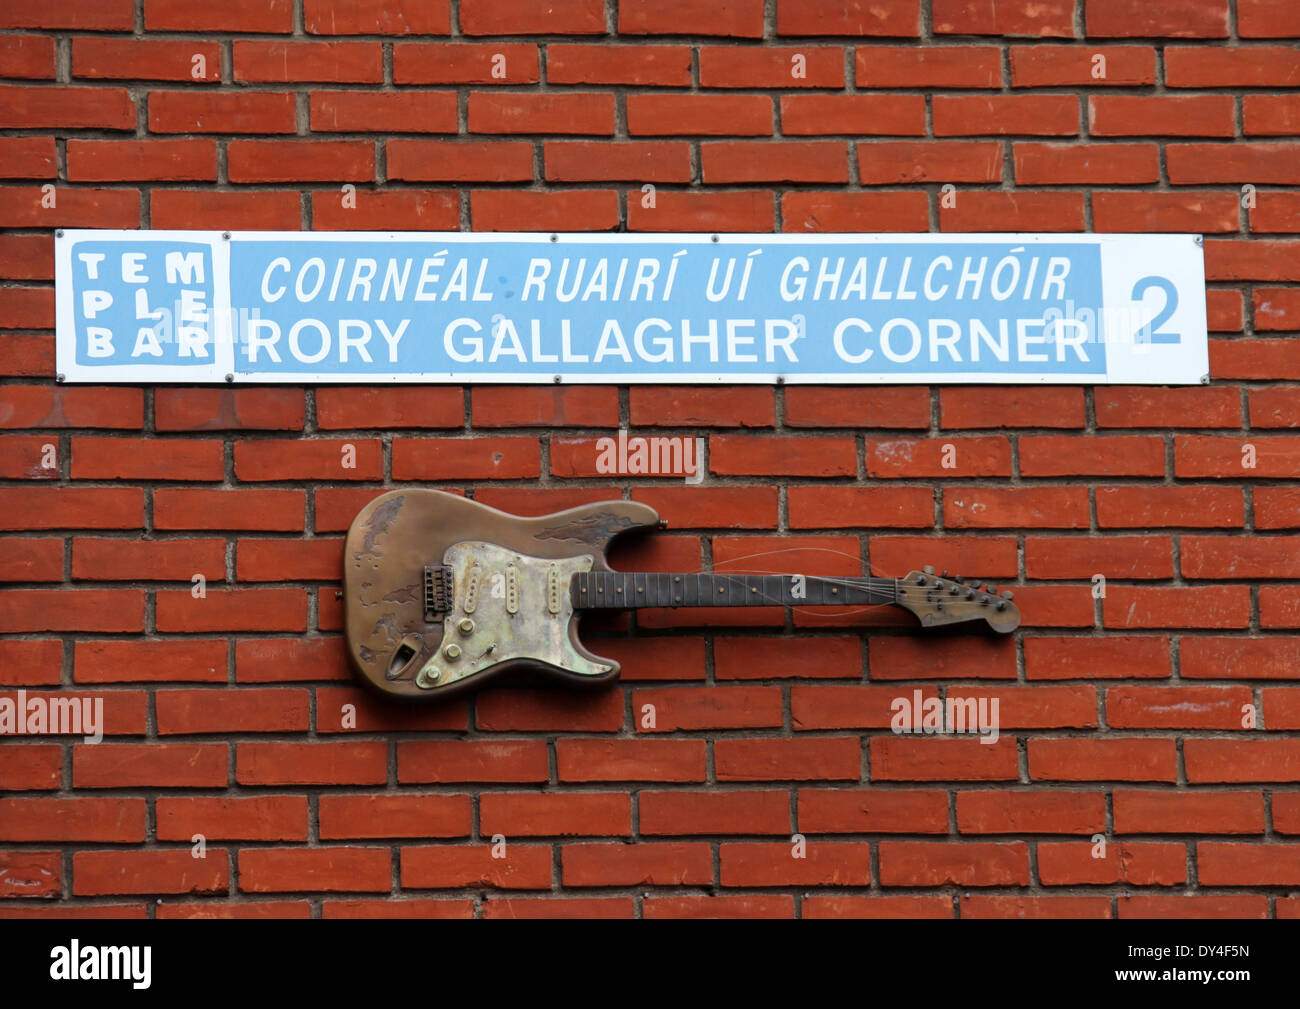 Rory Gallagher Corner Street Sign in Dublin Stock Photo